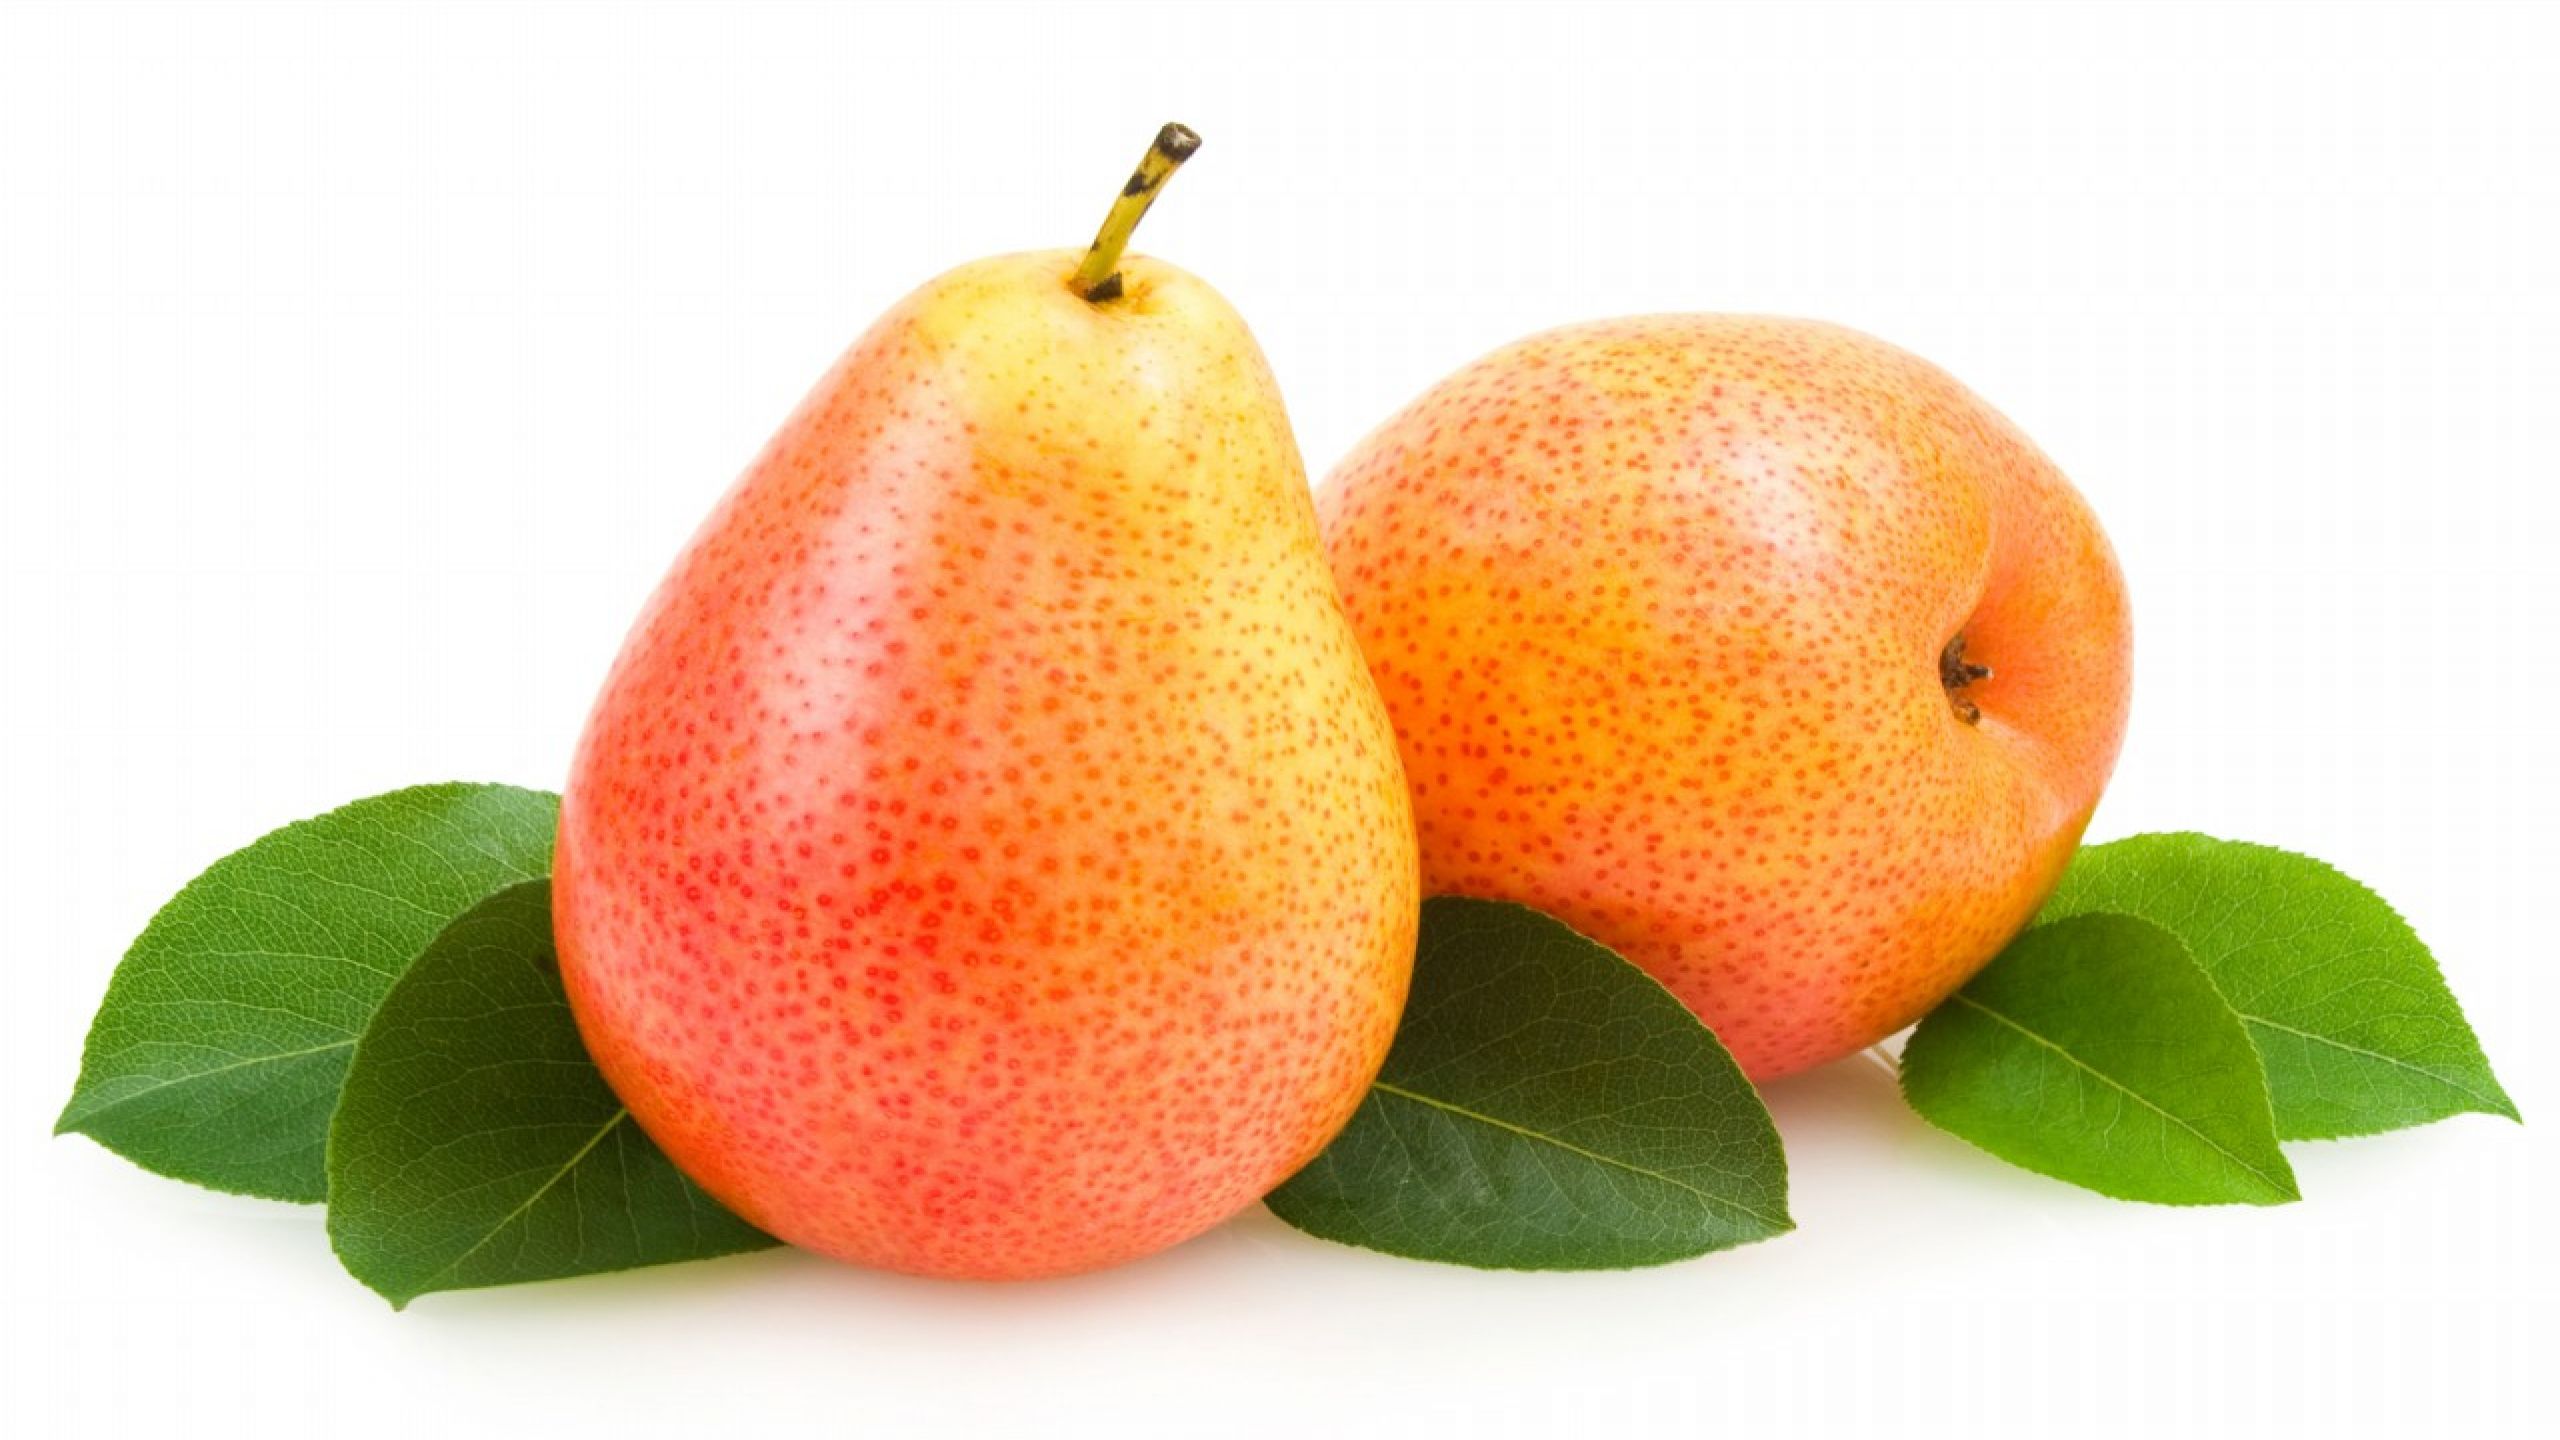 Pics of pears fruit